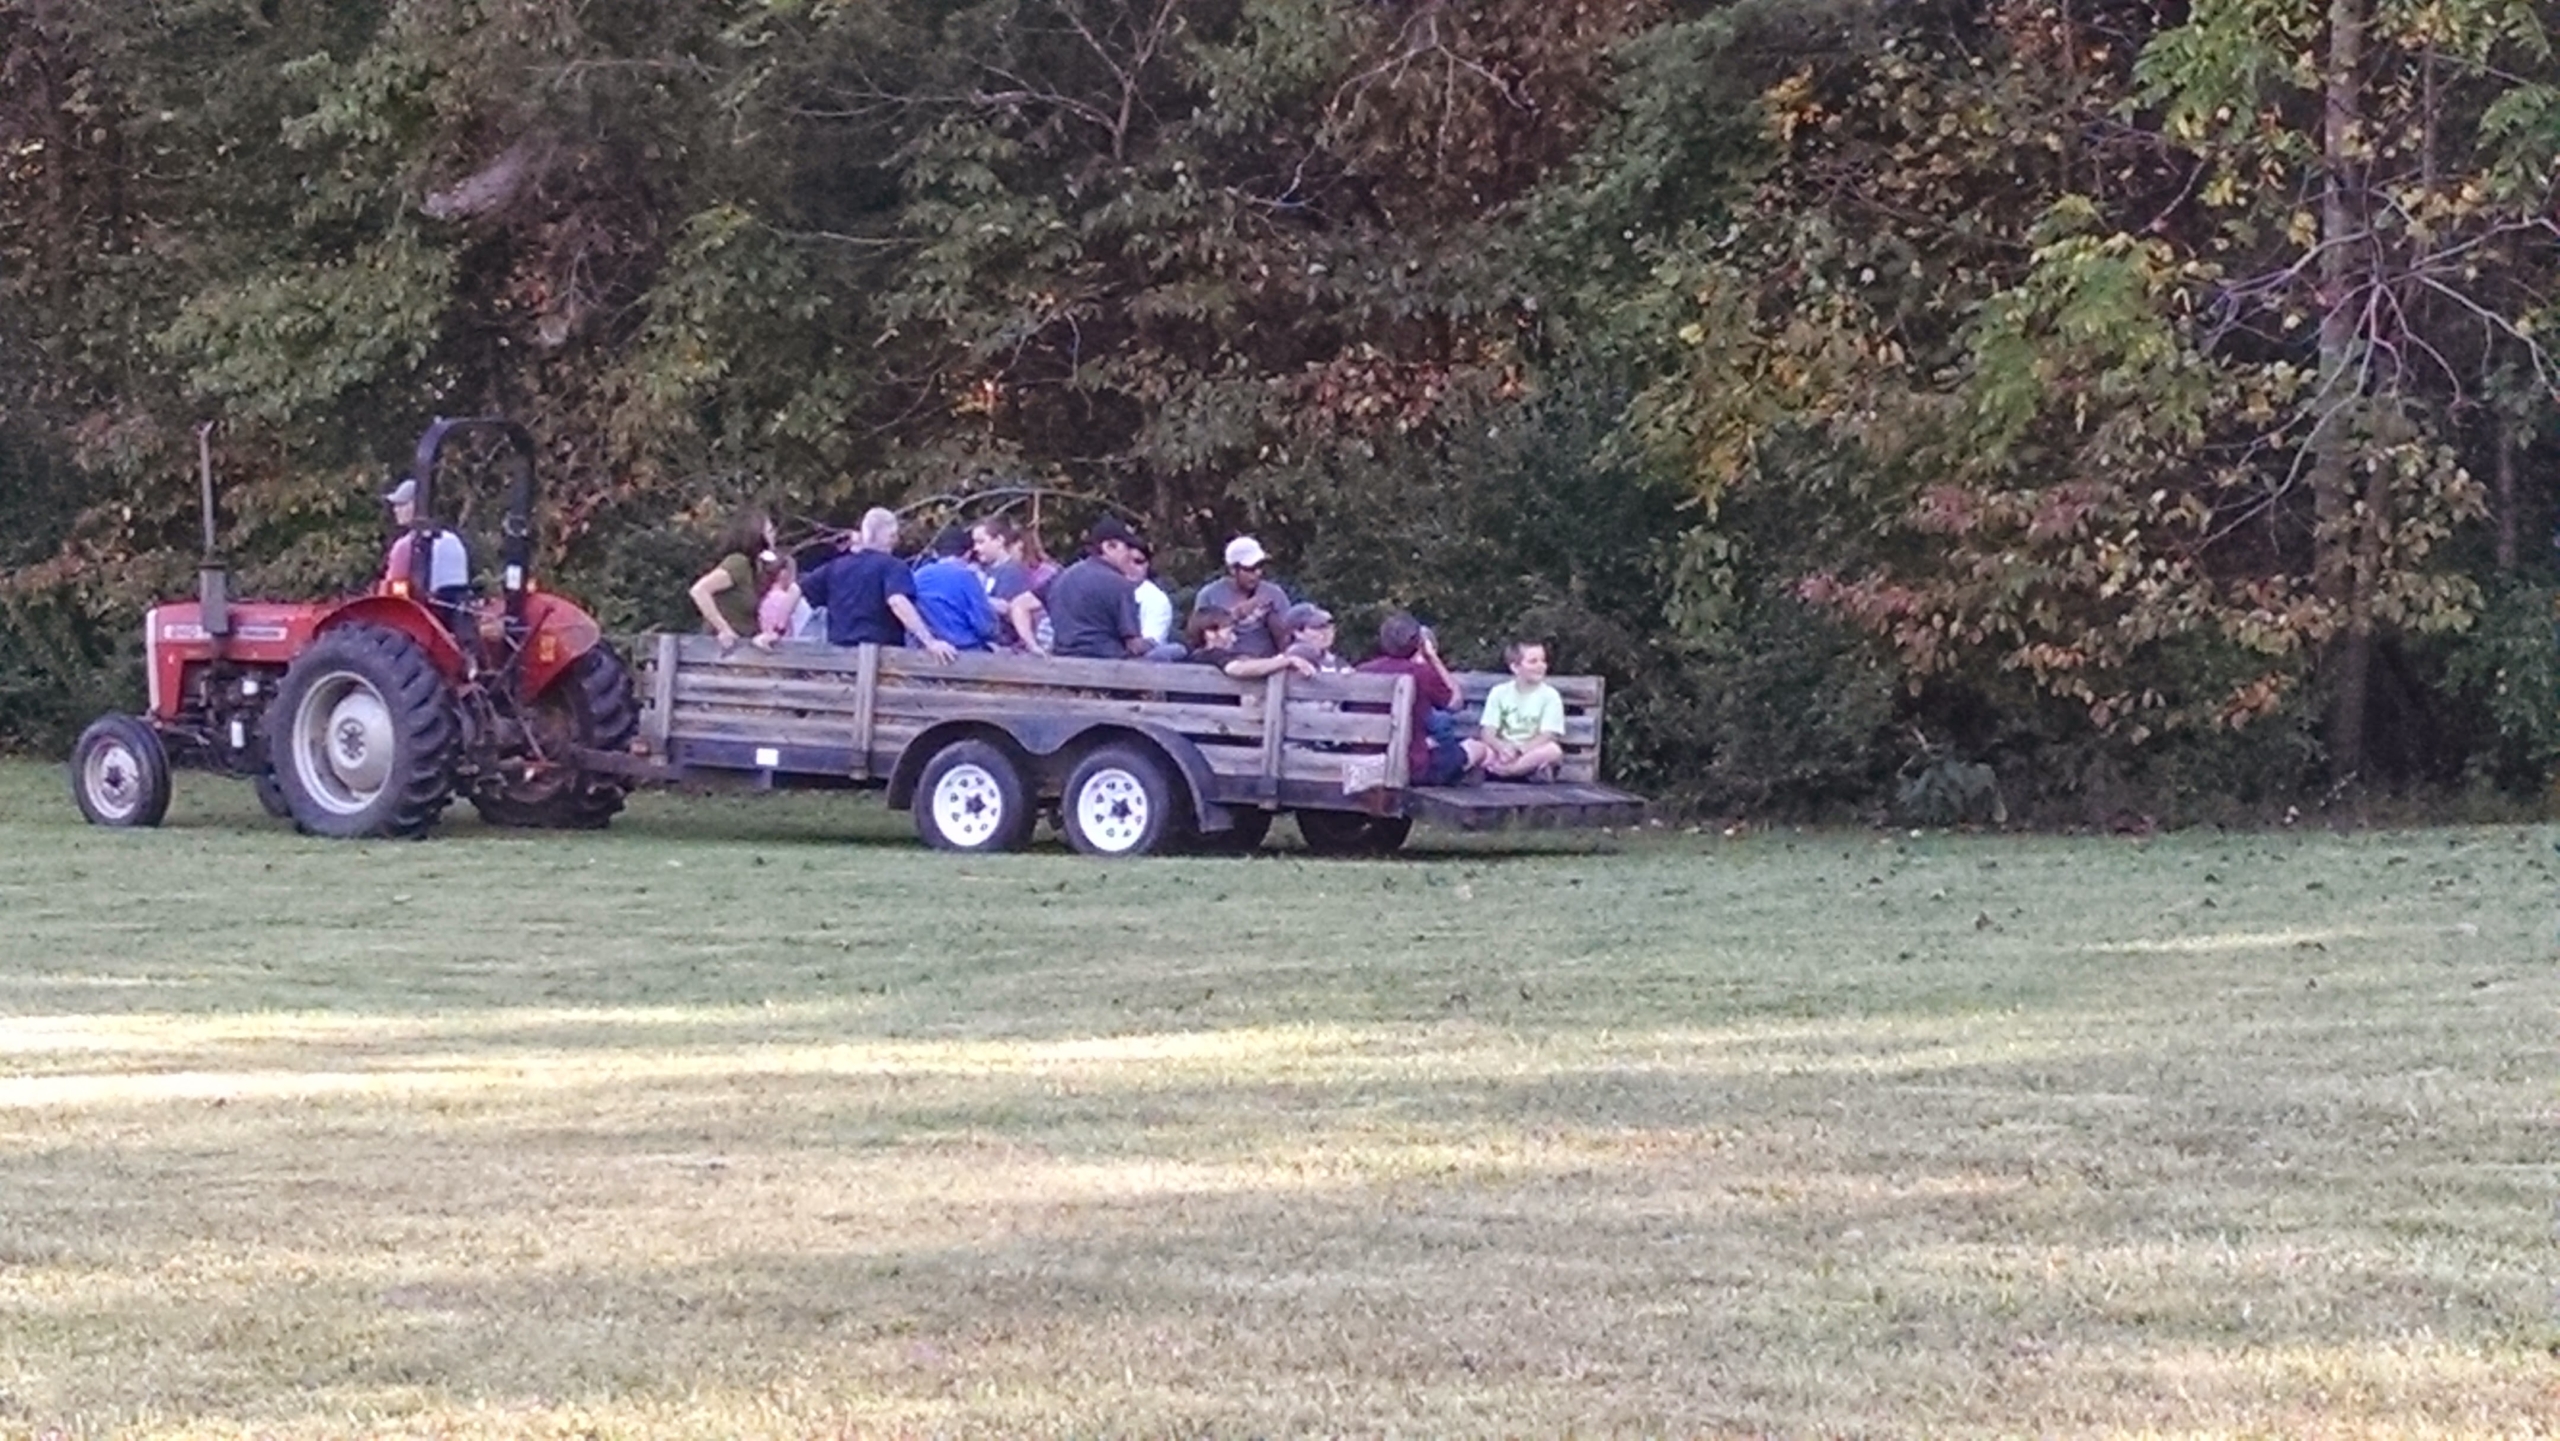 Group of people enjoying a tractor ride at an NC Fragile X event.